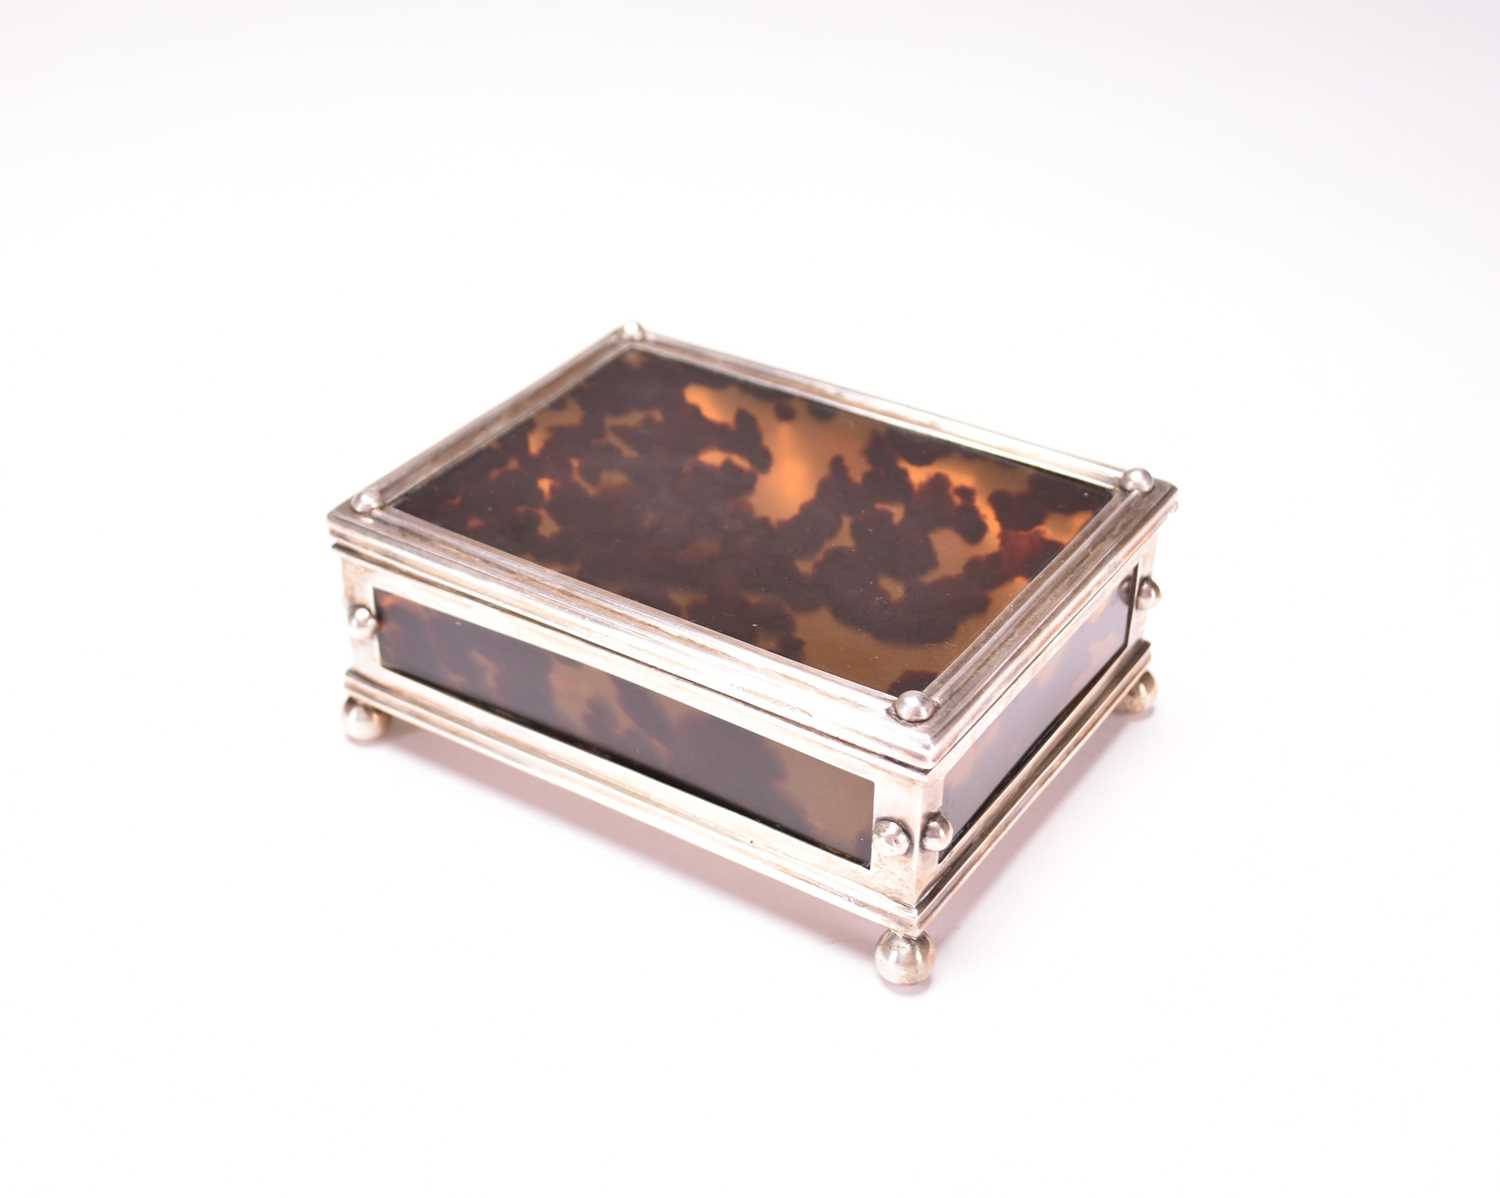 Lot 13 - A French silver and tortoiseshell casket